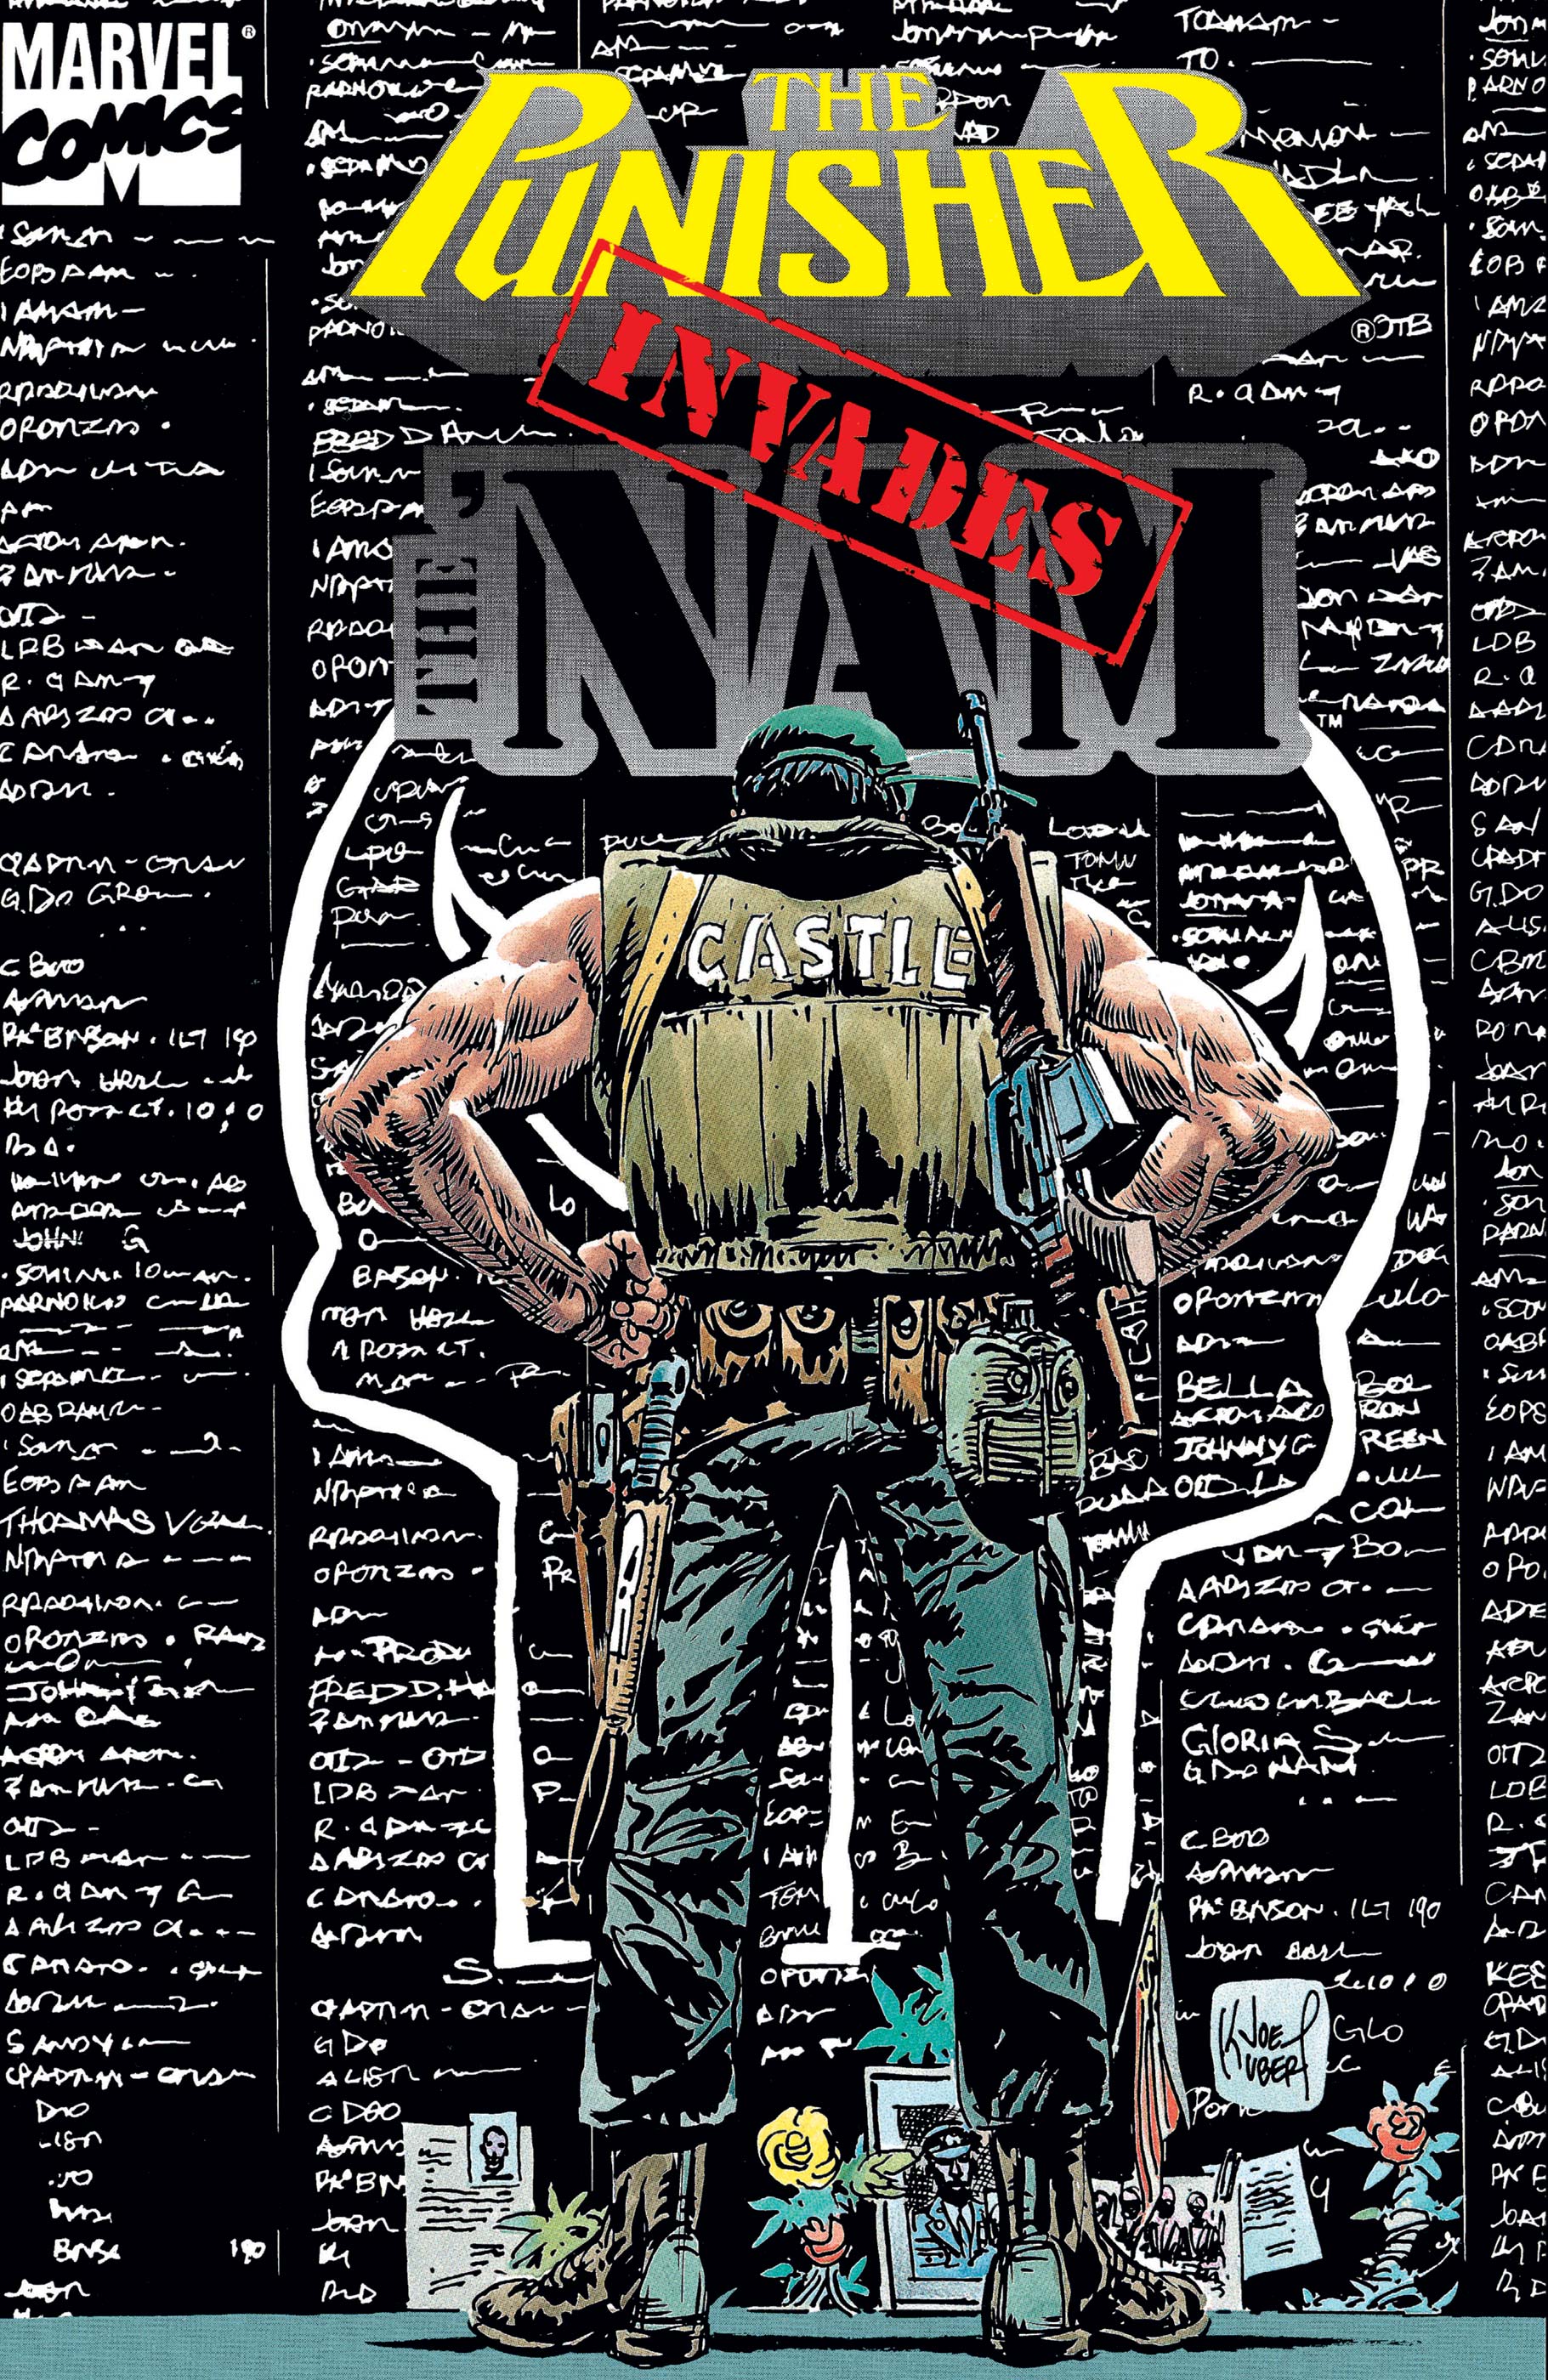 Punisher Invades The 'Nam: Final Invasion (1994) #1 | Comic Issues | Marvel